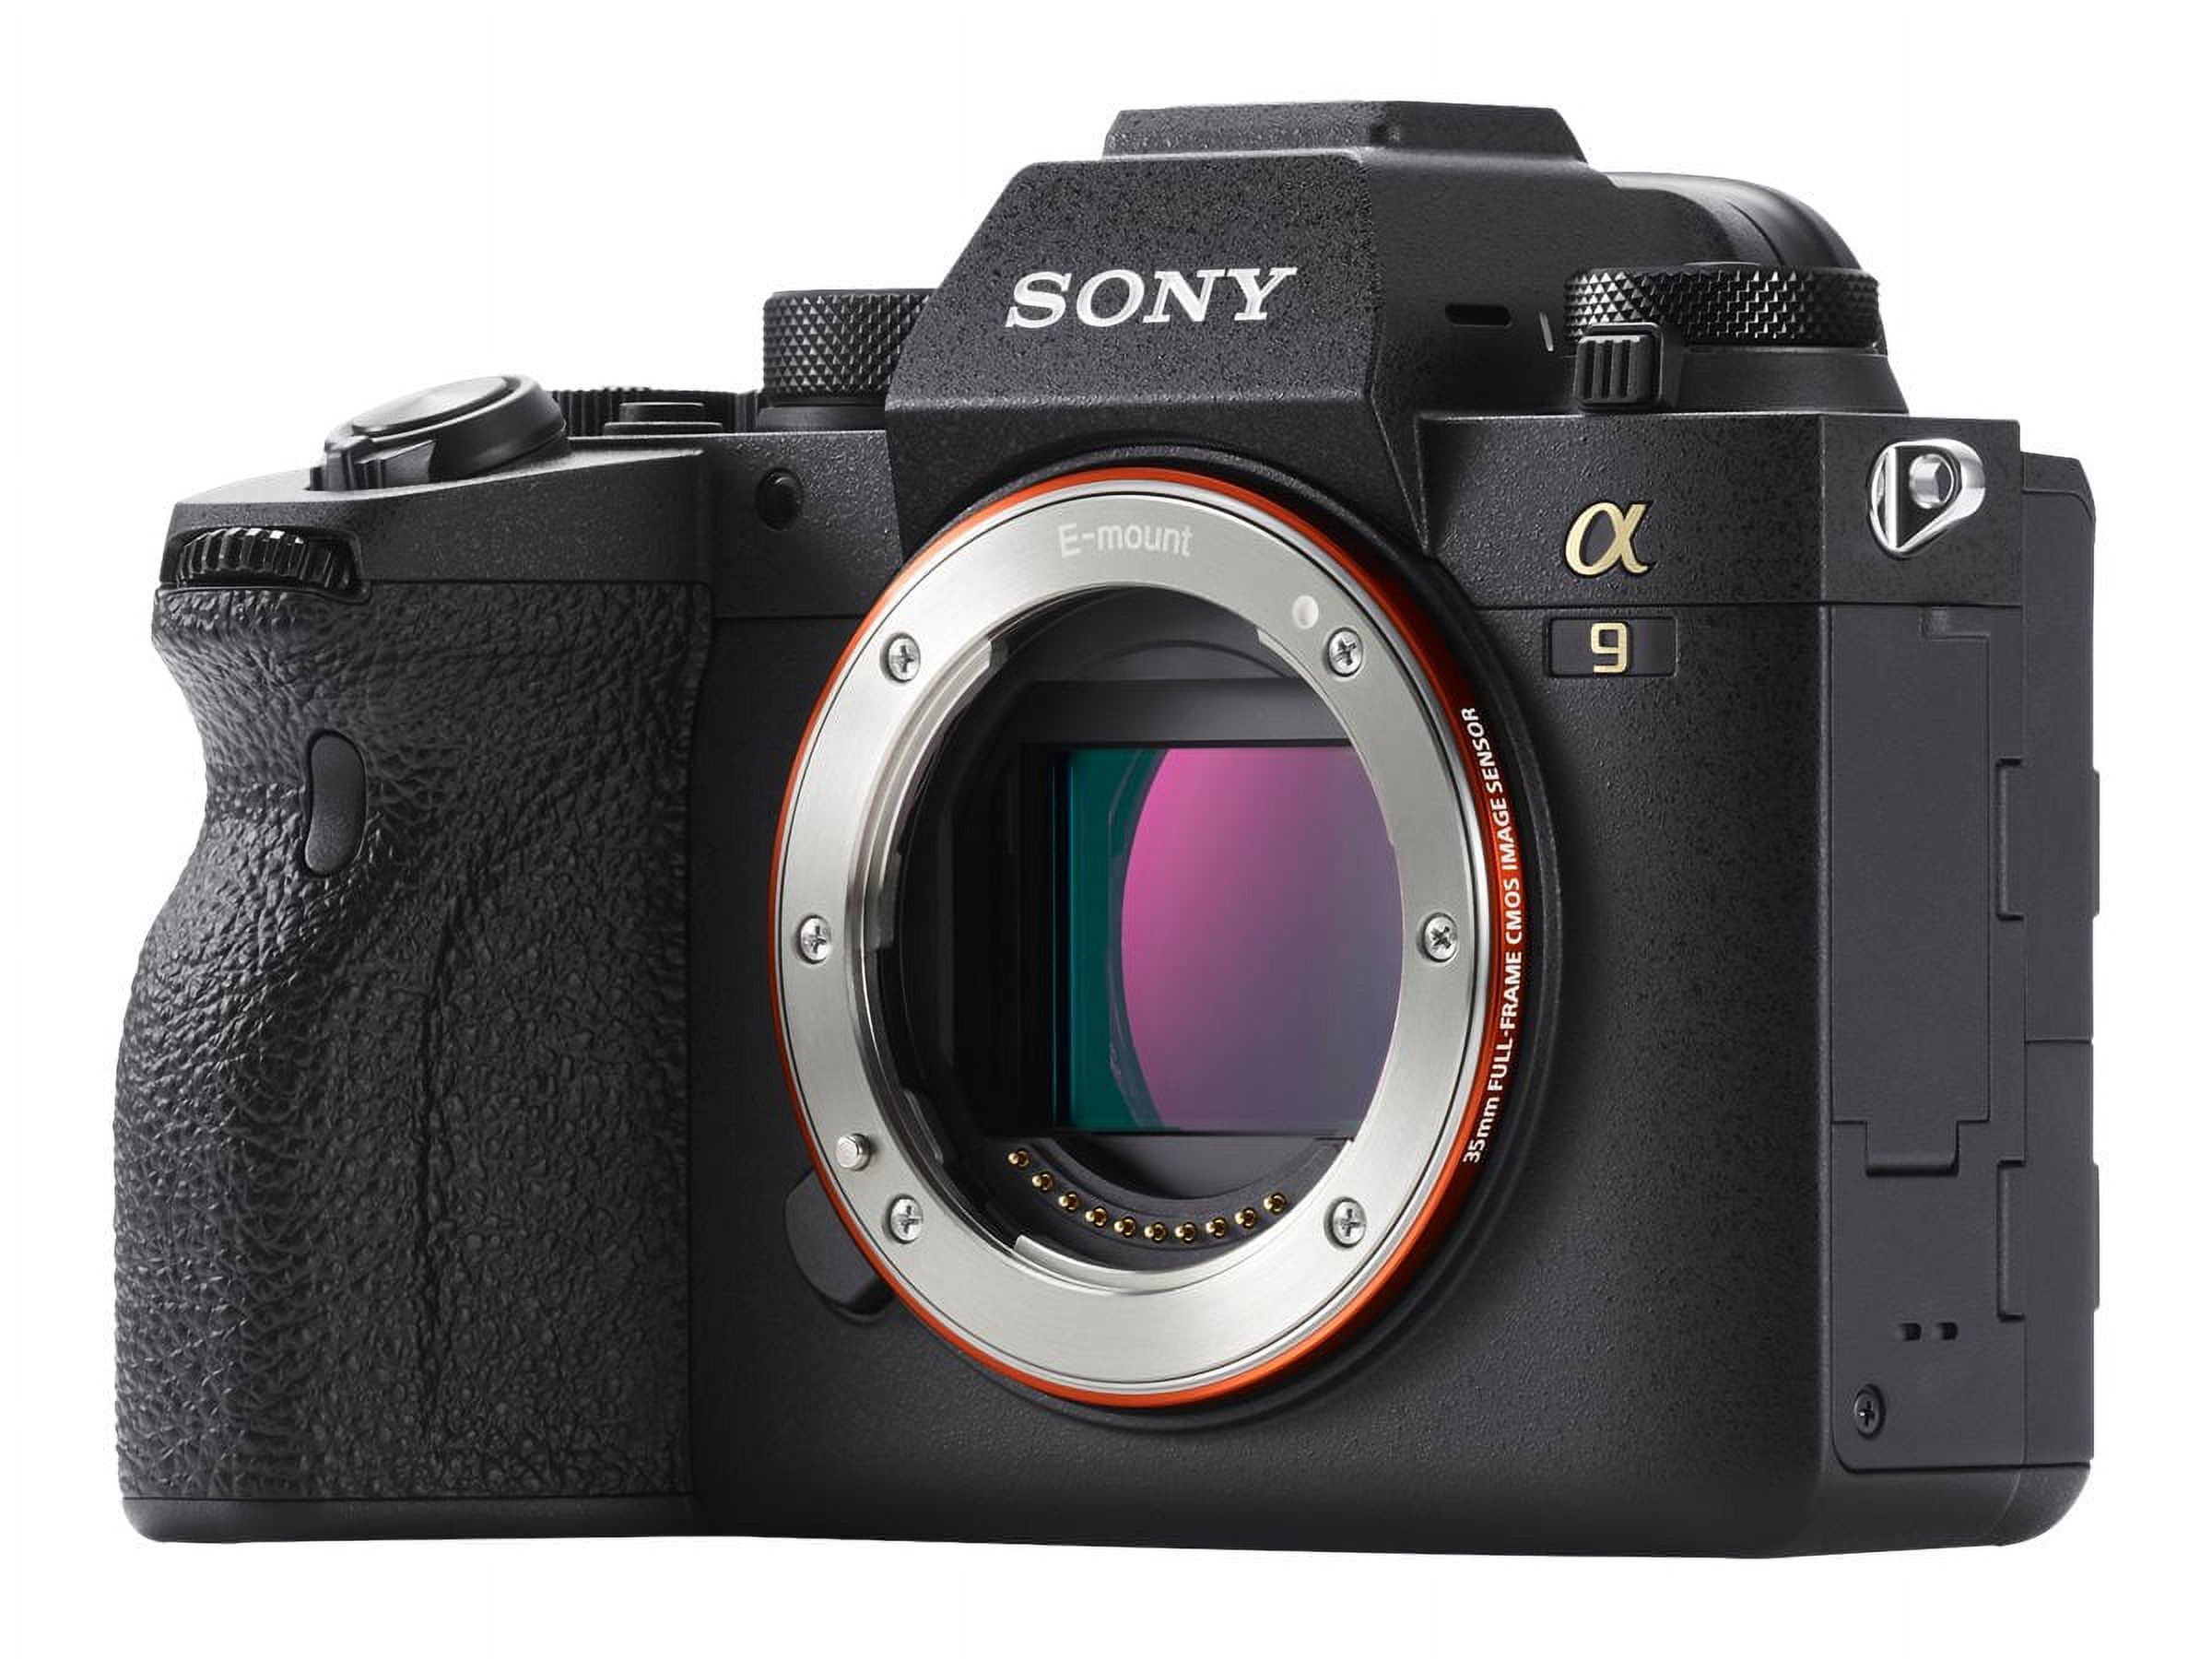 Sony a9 II ILCE-9M2 - Digital camera - mirrorless - 24.2 MP - Full Frame - 4K / 30 fps - body only - NFC, Wi-Fi, Bluetooth - black - image 1 of 14